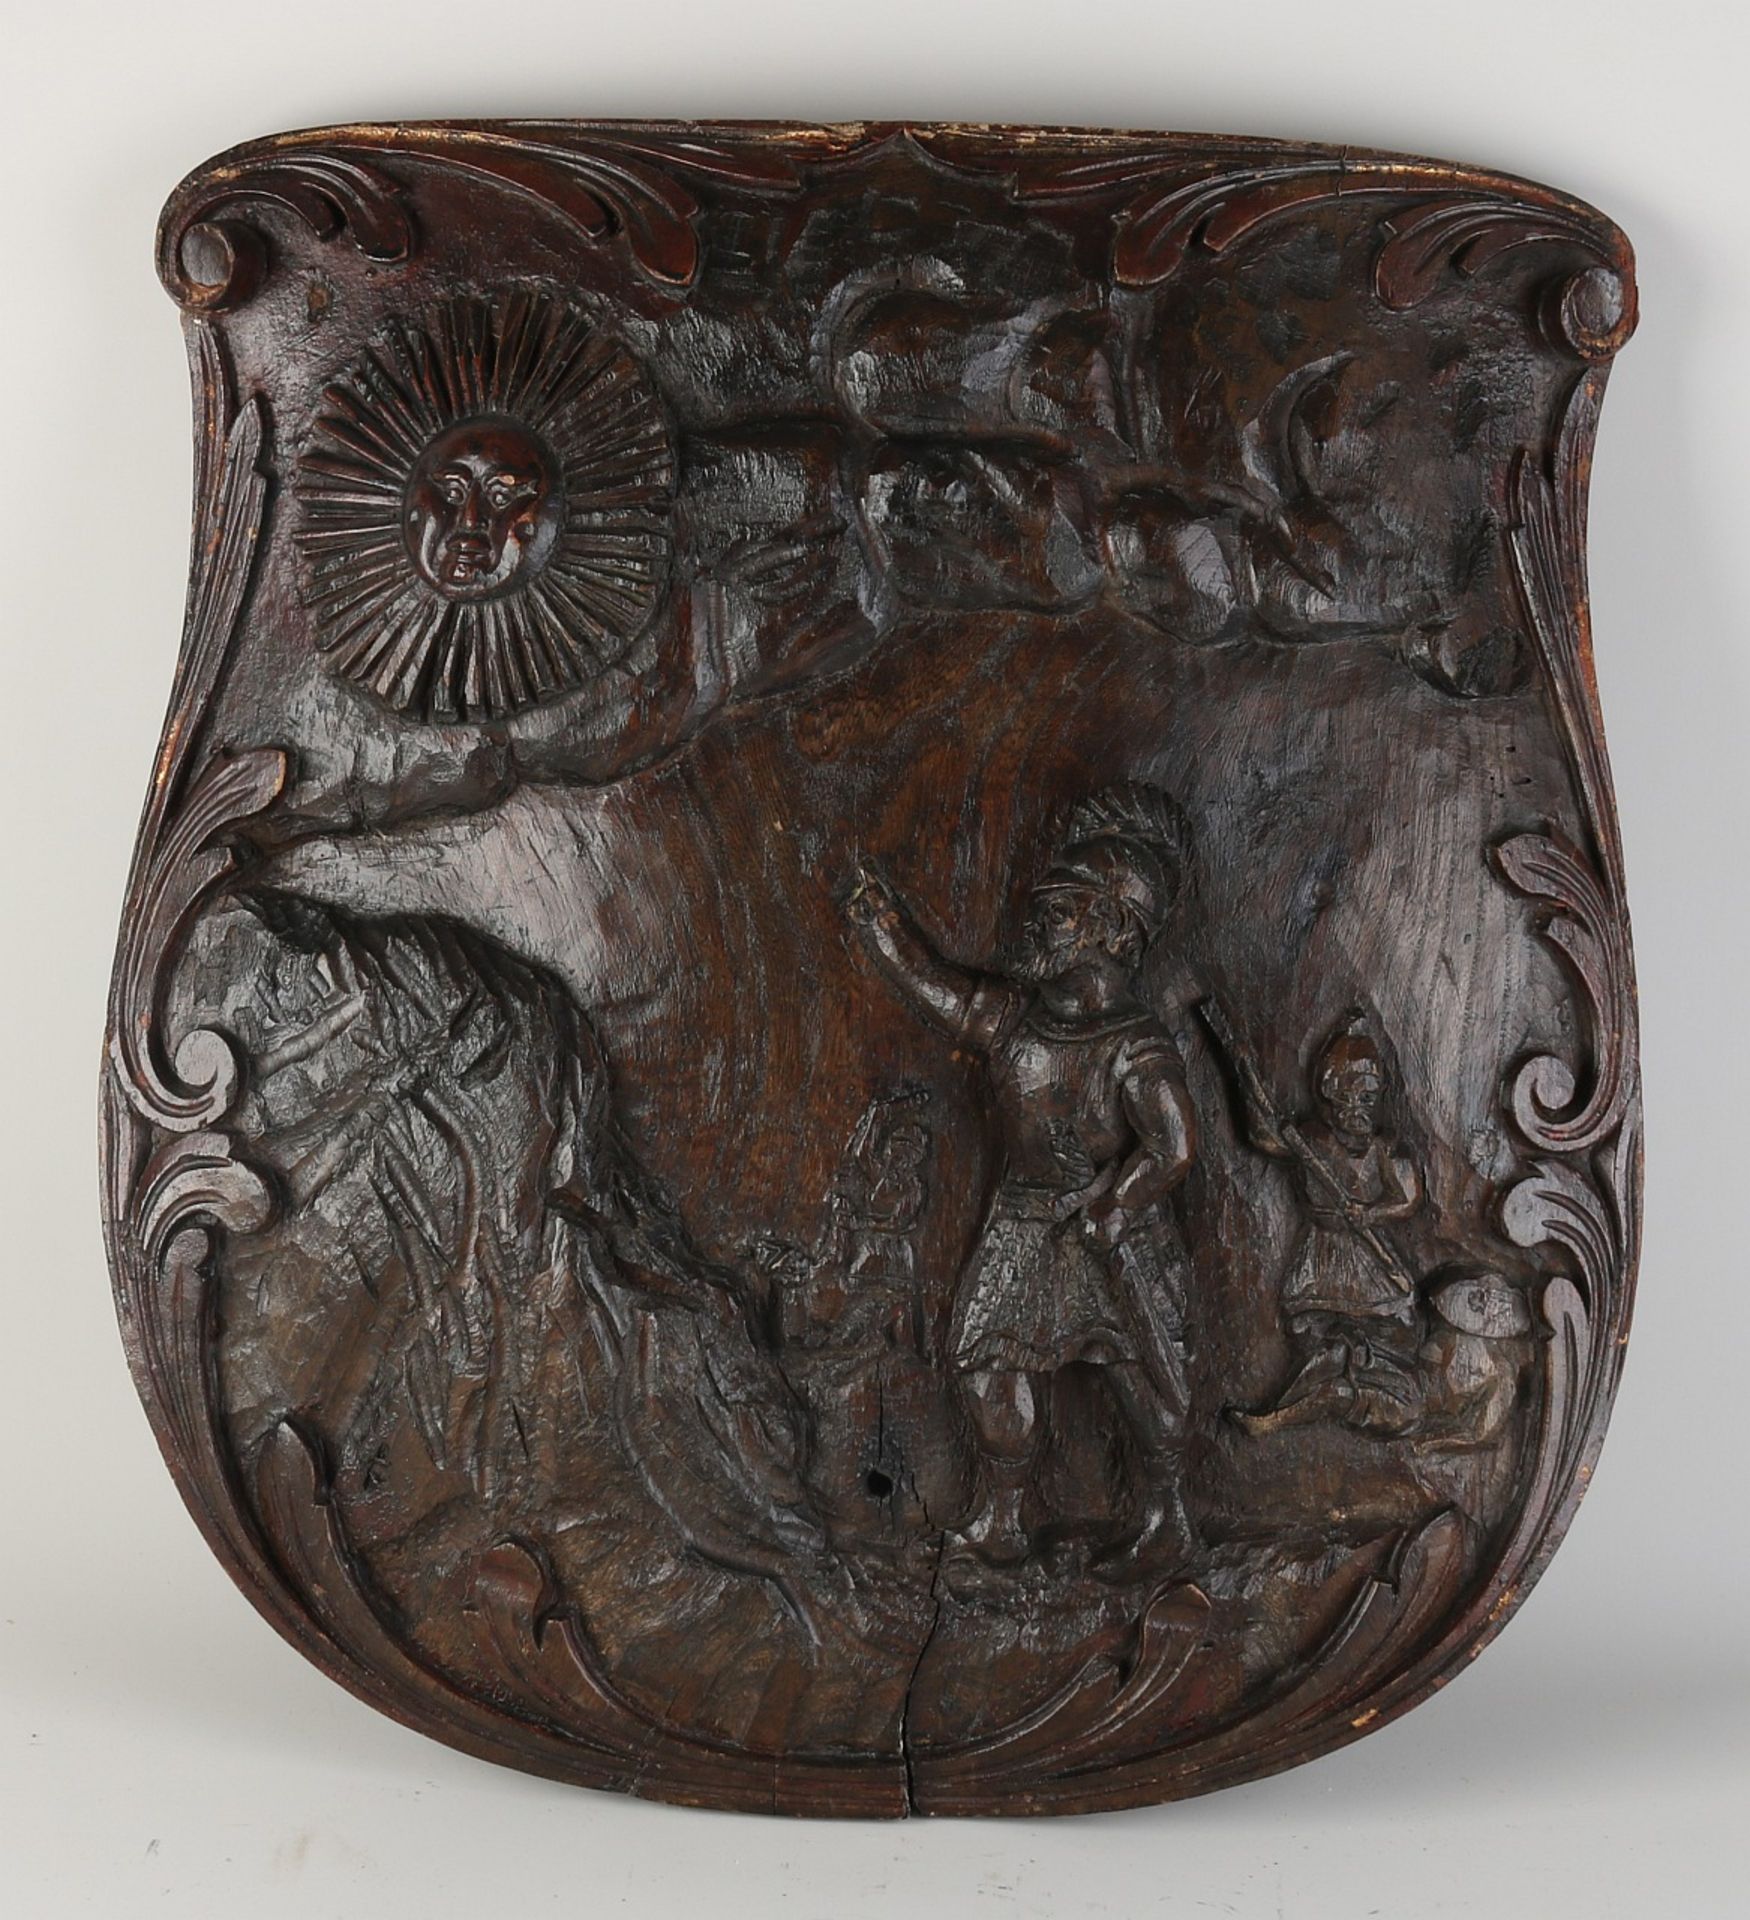 Carved shield with representation